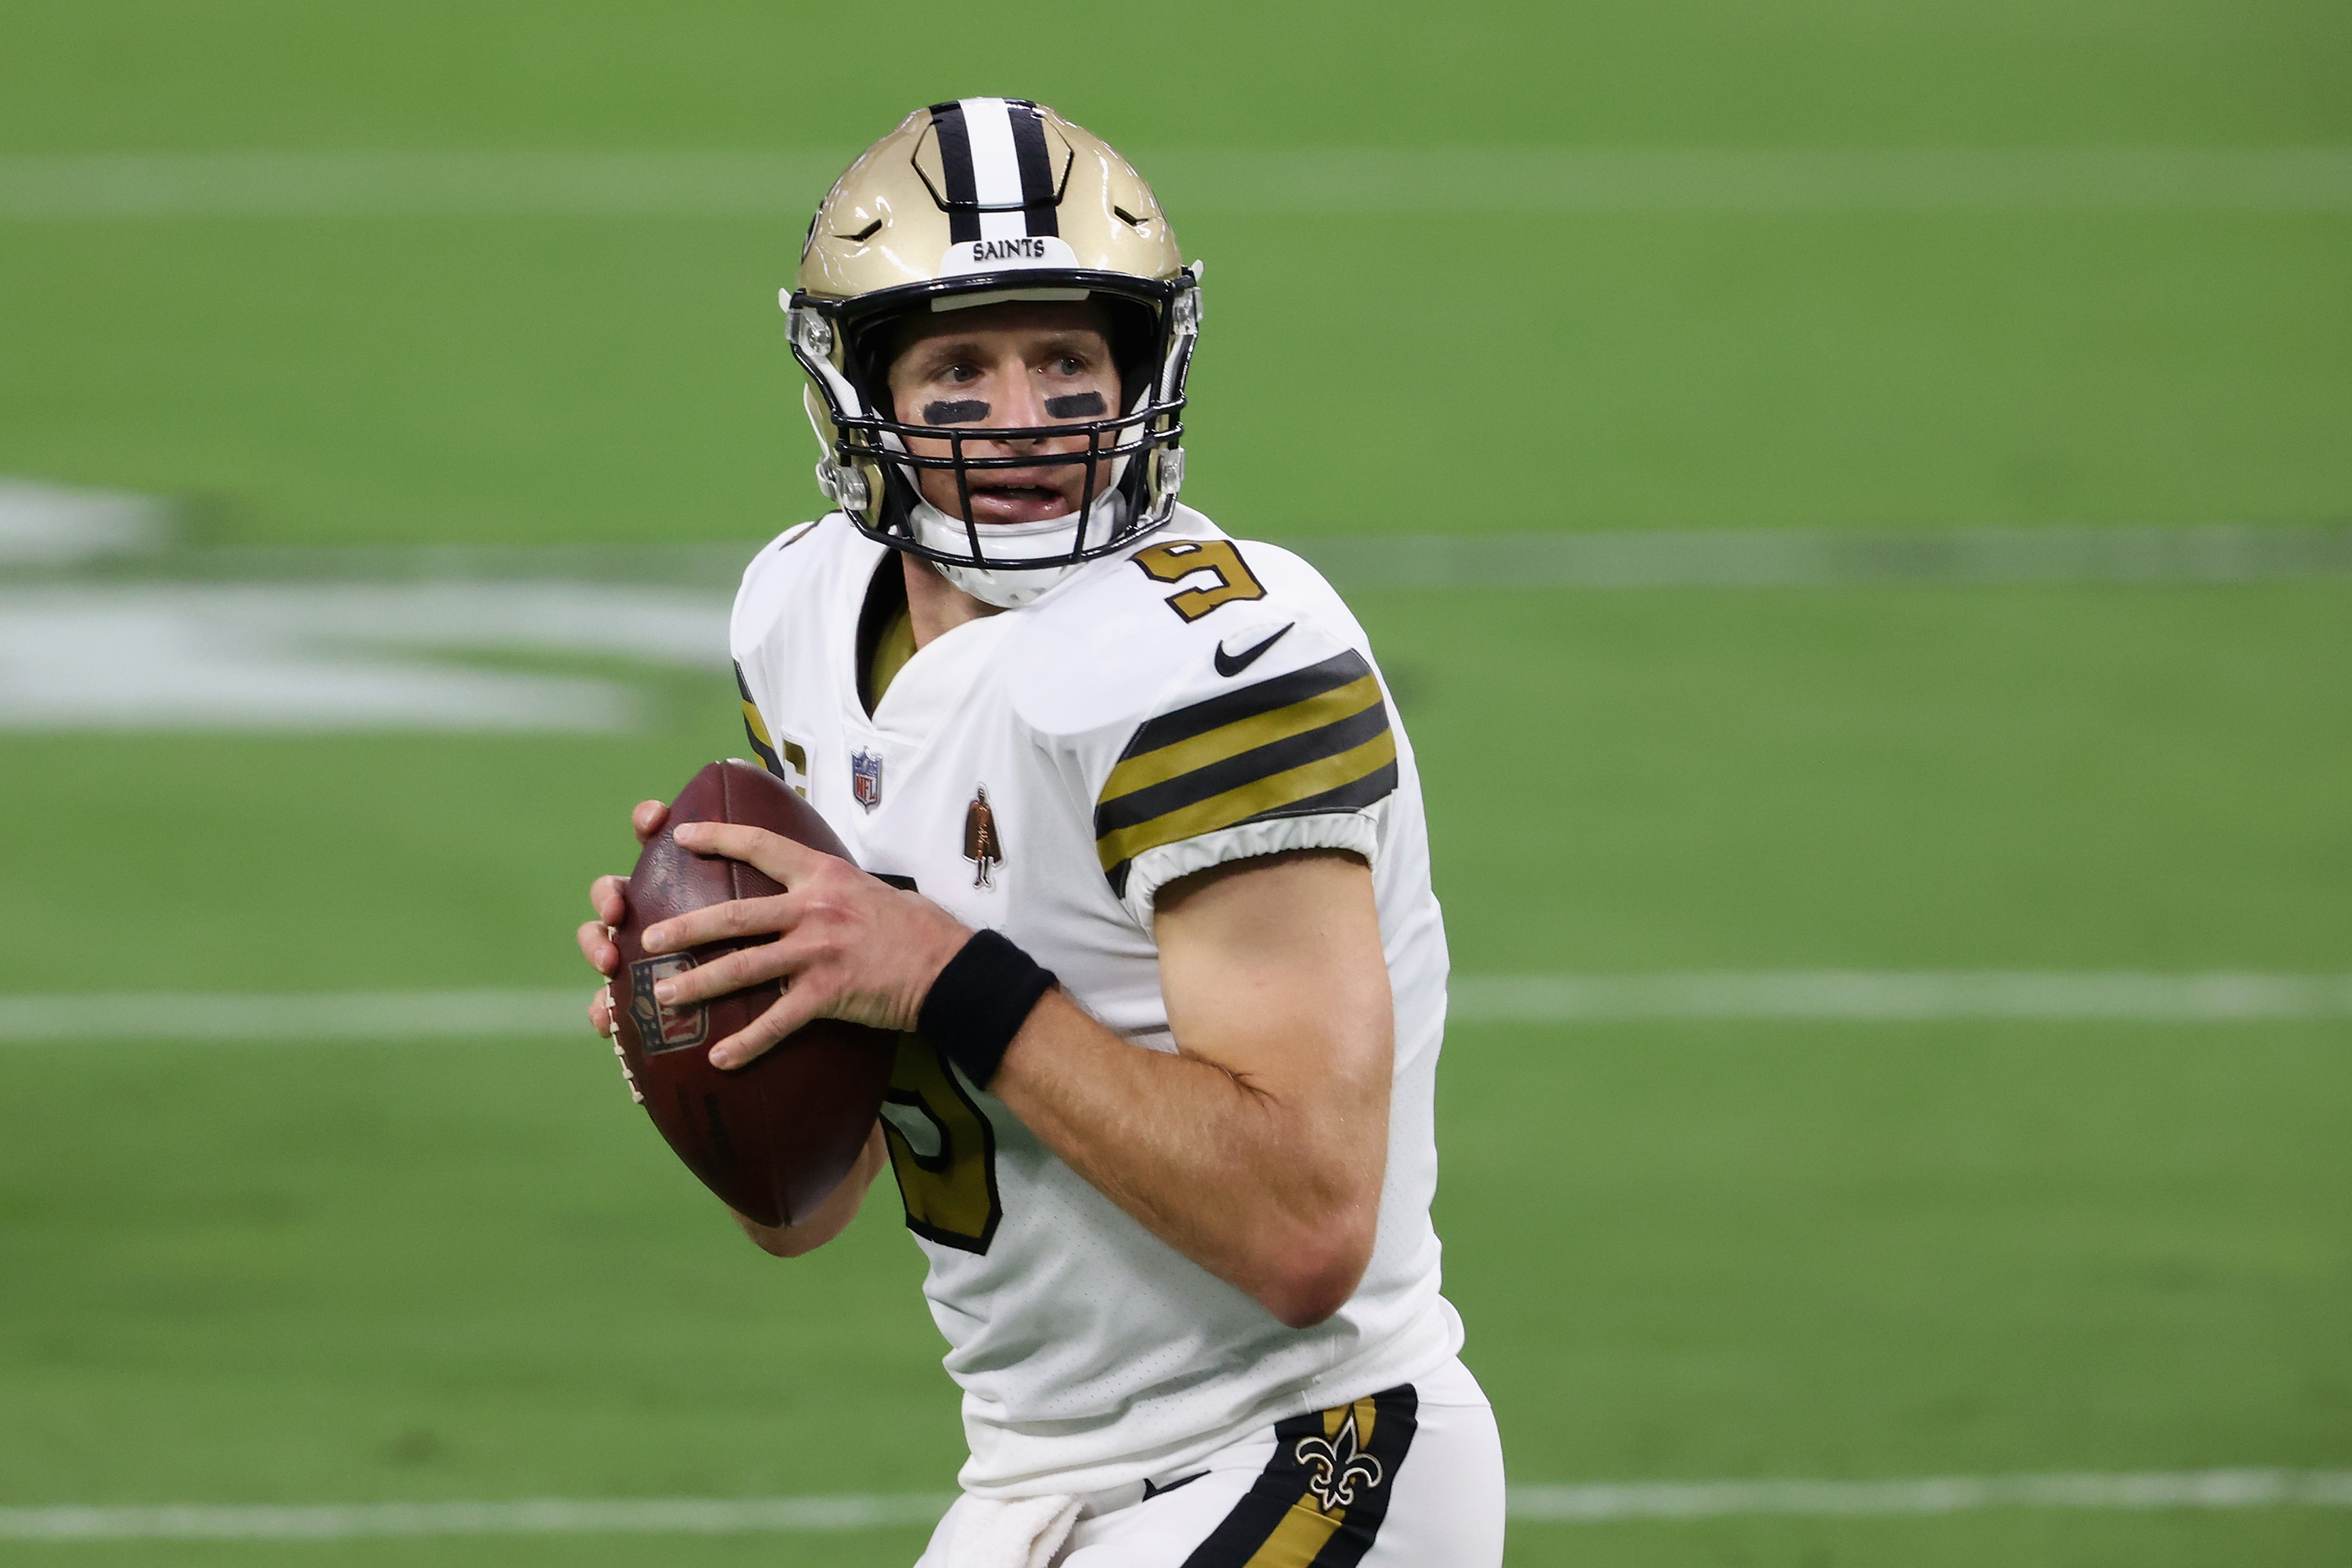 Saints vs. Packers: Game Time, TV, Radio, Online Streaming, Mobile